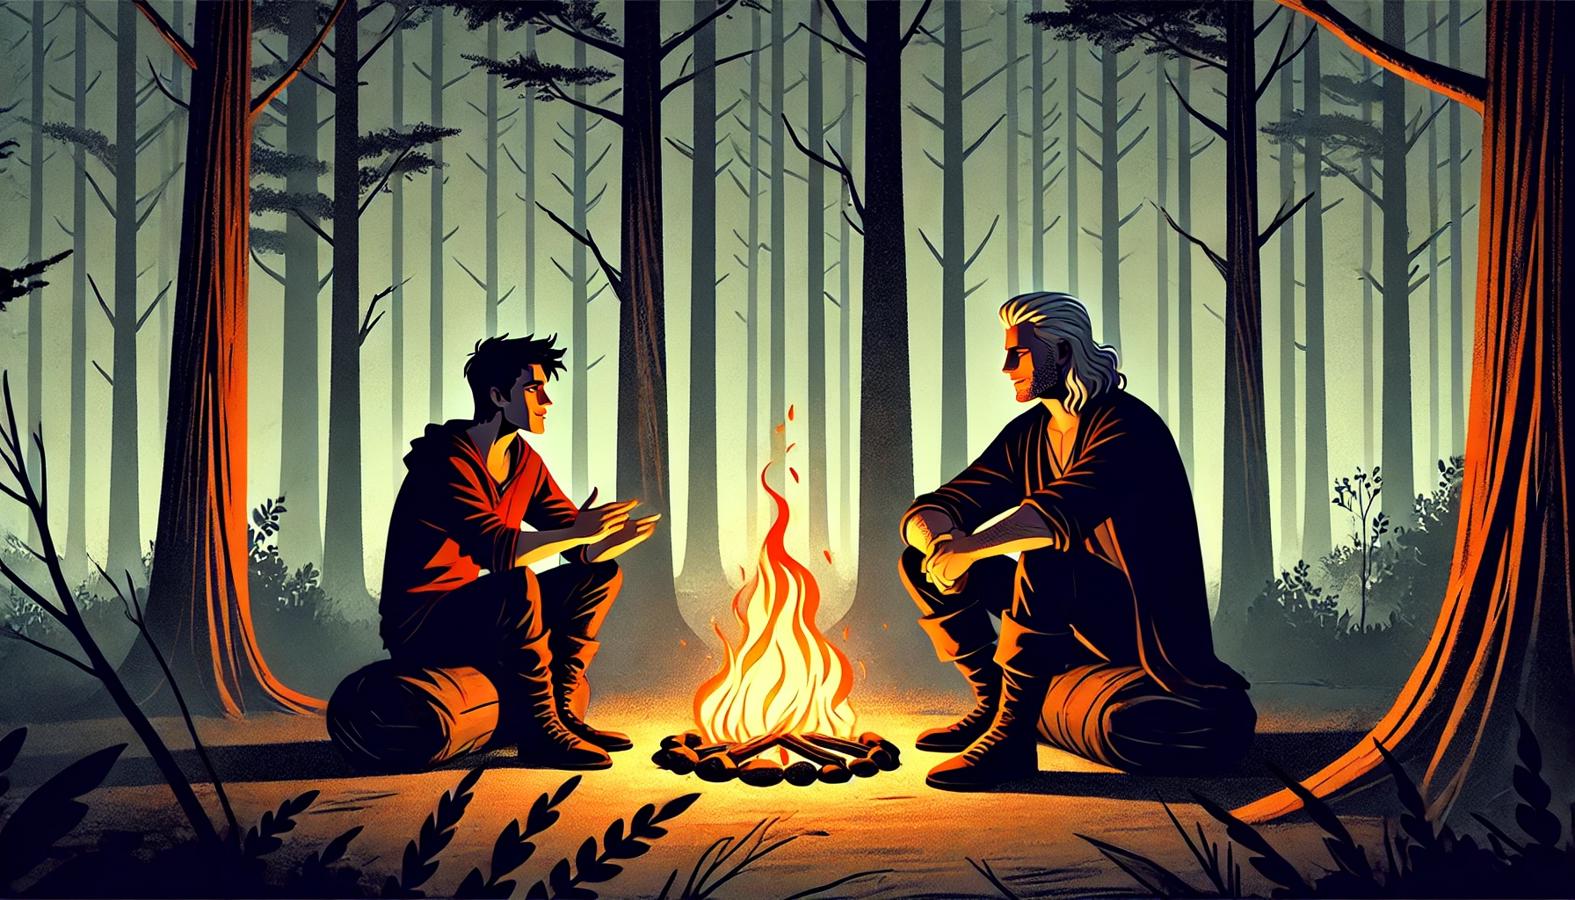 Edgar and Alaric sitting by a campfire during their journey, surrounded by a dense forest.